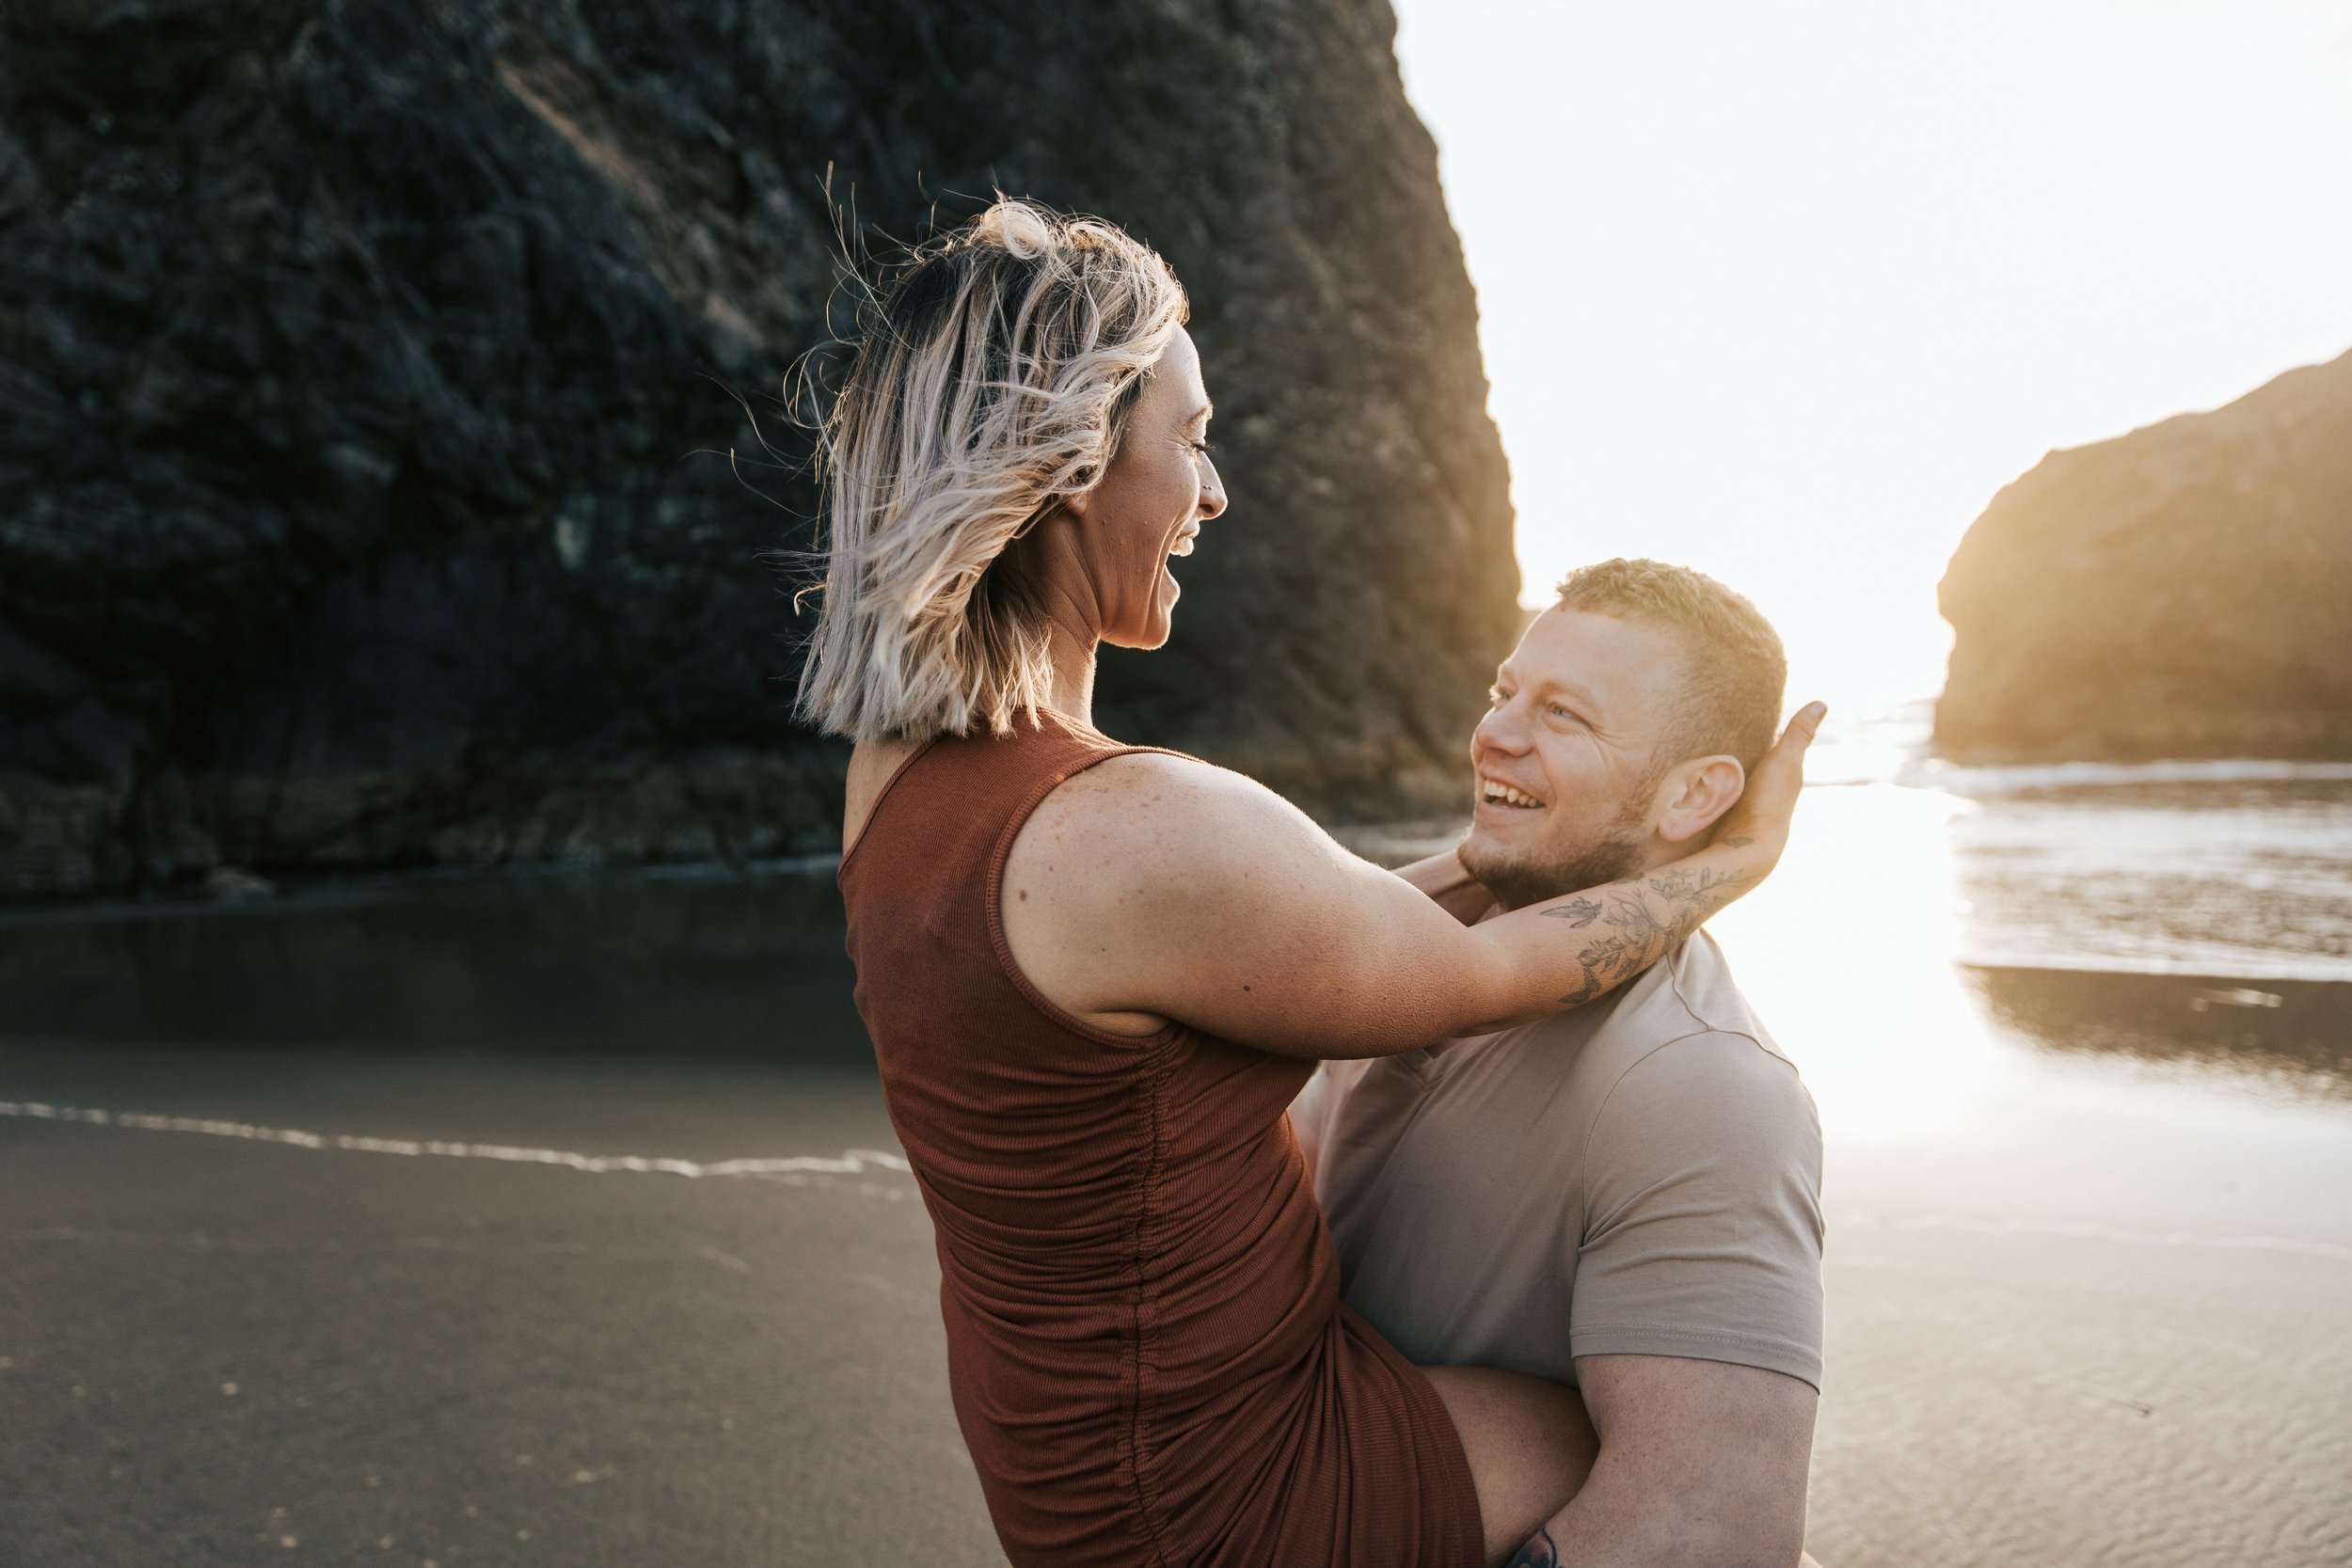  Oregon coast engagement session. Couples session in Southern Oregon. Couple playing on the beach with the sunset behind them at golden hour. Man and woman laugh together during an engagement shoot. 